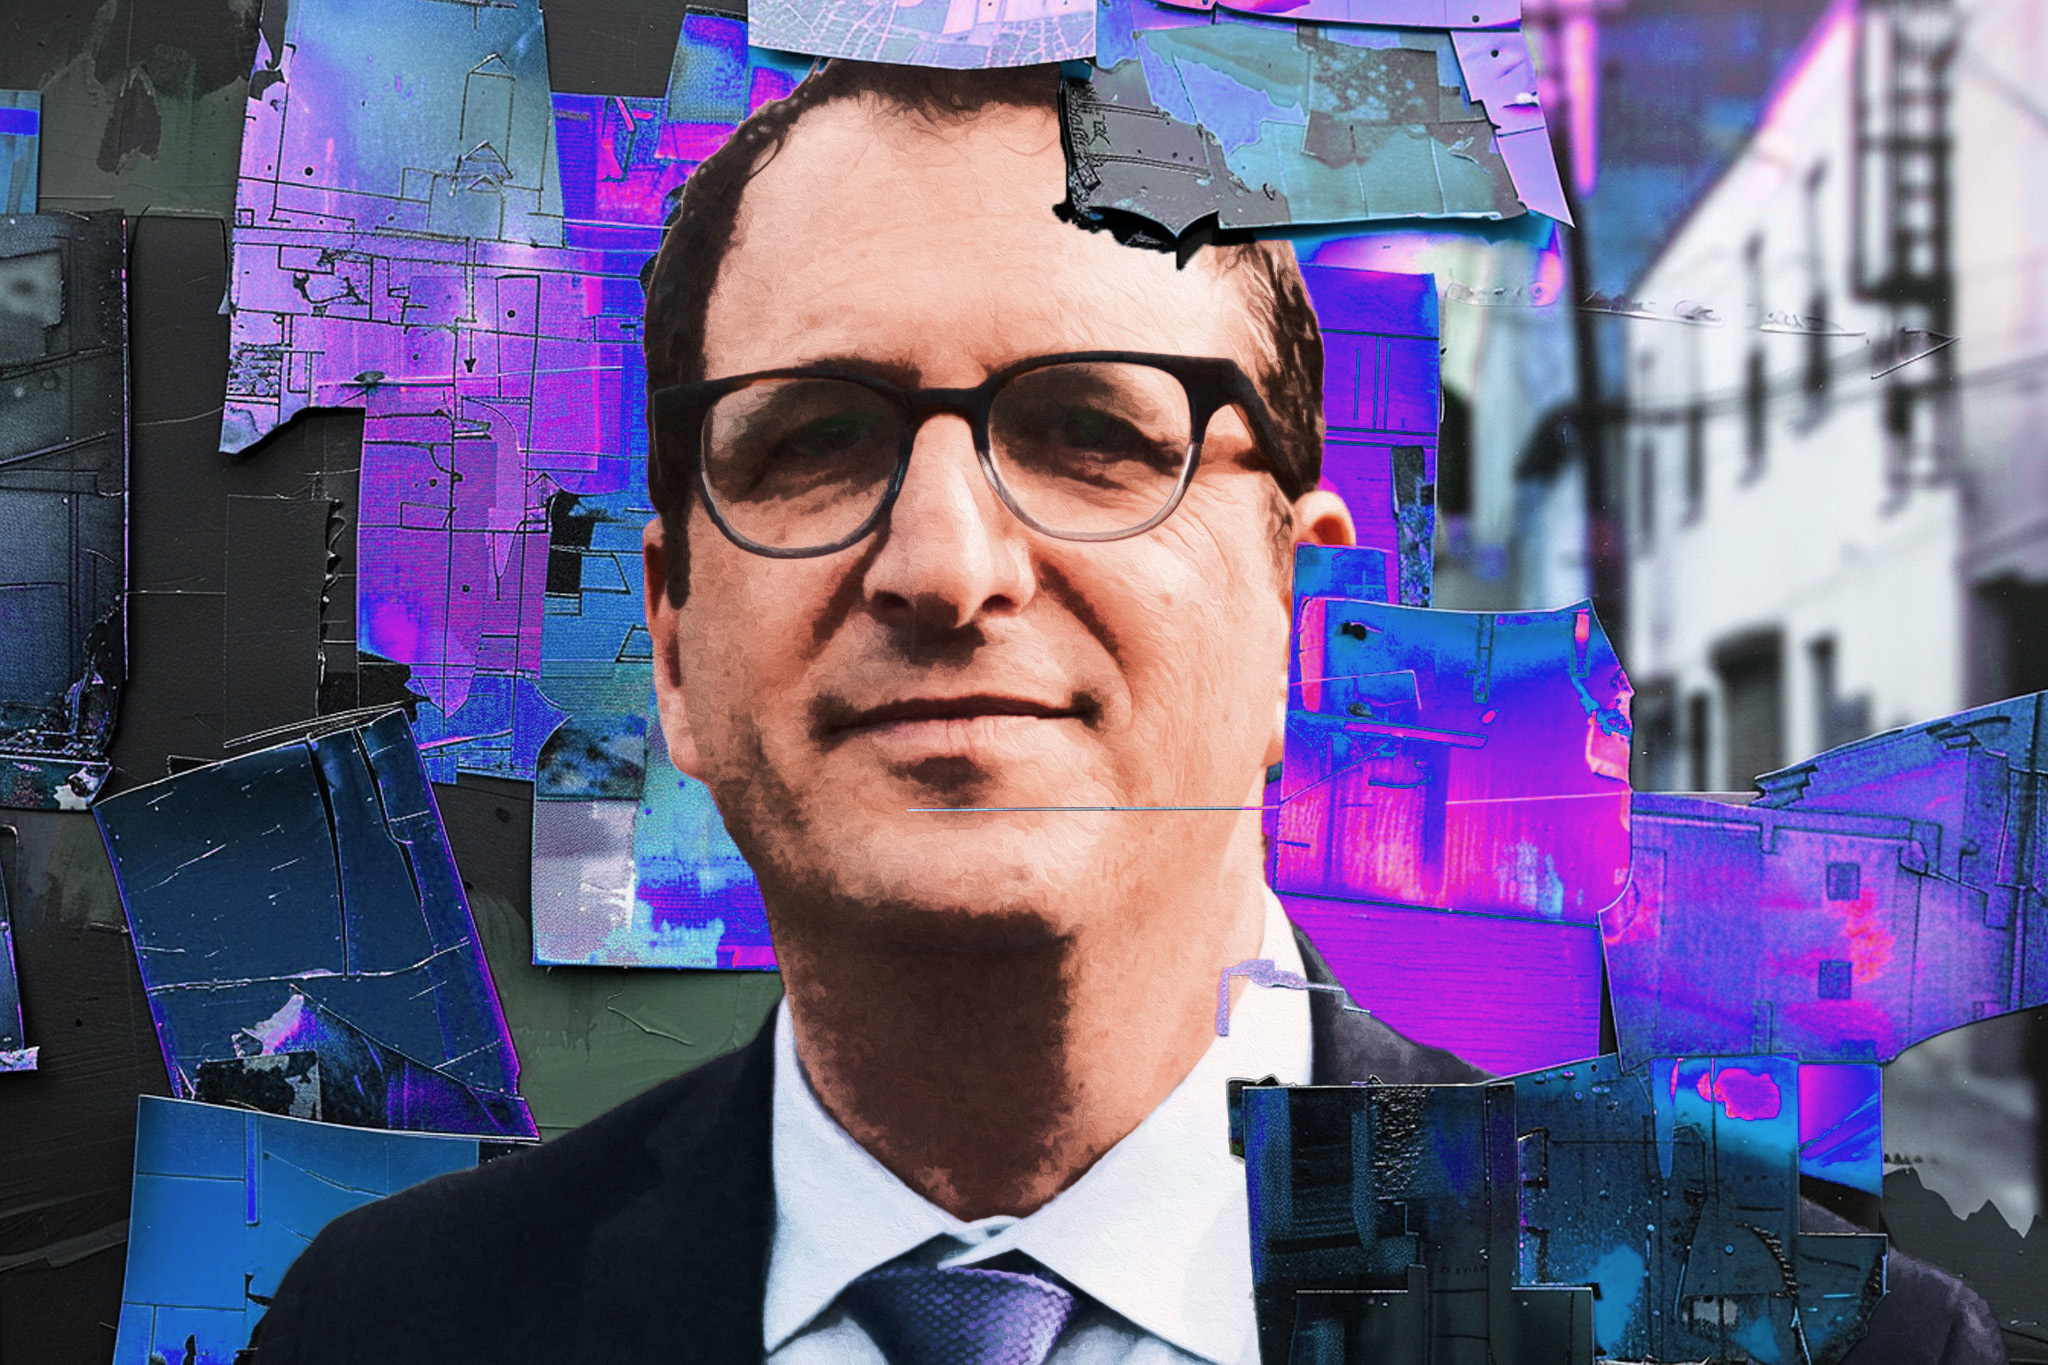 A man in glasses and a suit is superimposed over a chaotic backdrop of fragmented and color-shifted urban imagery.